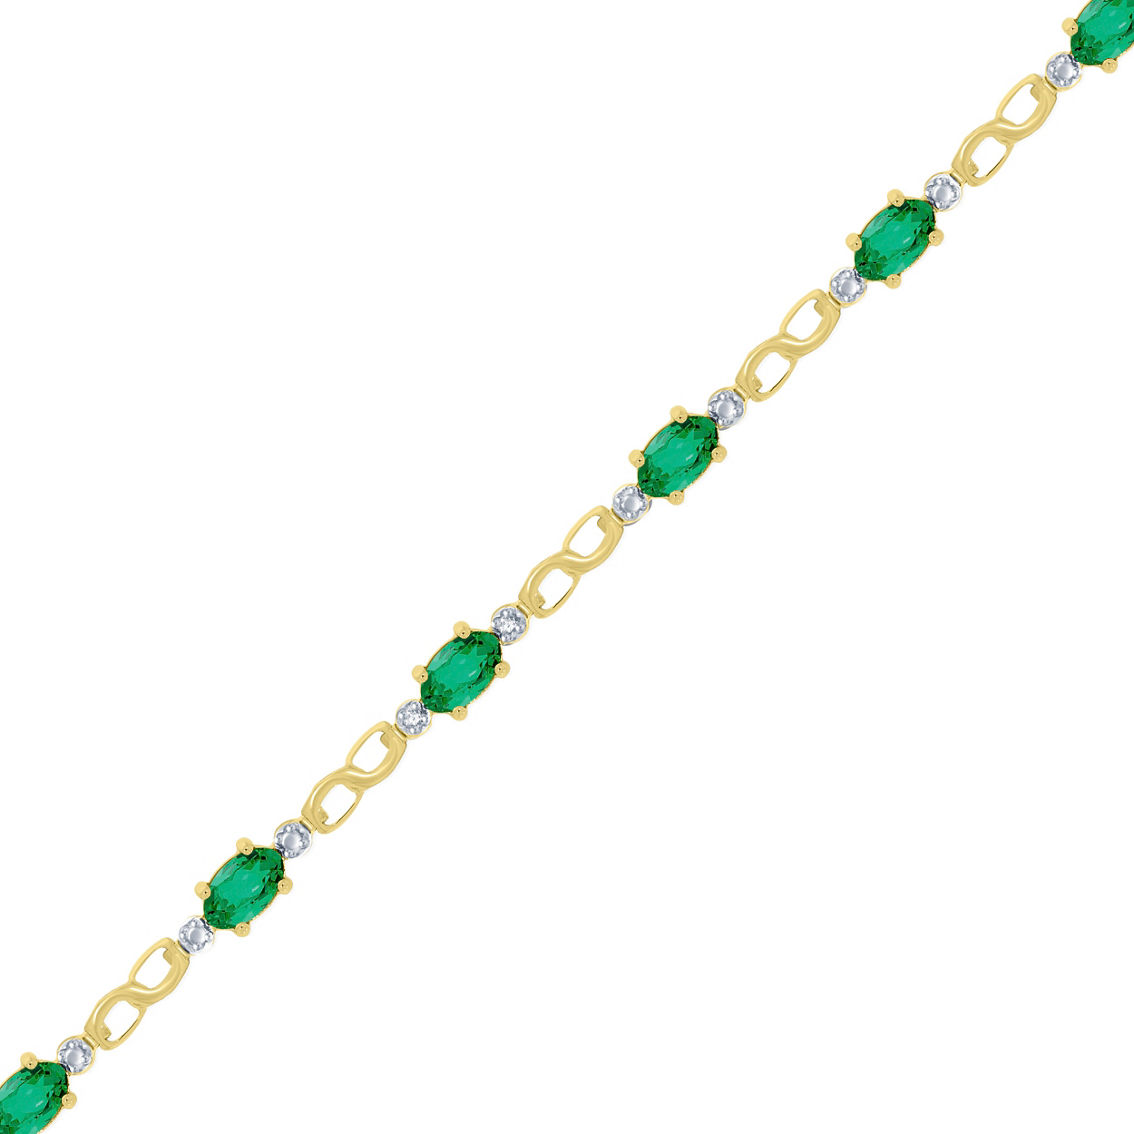 10K Yellow Gold Created Emerald and Diamond Accent Infinity Link Bracelet - Image 2 of 3